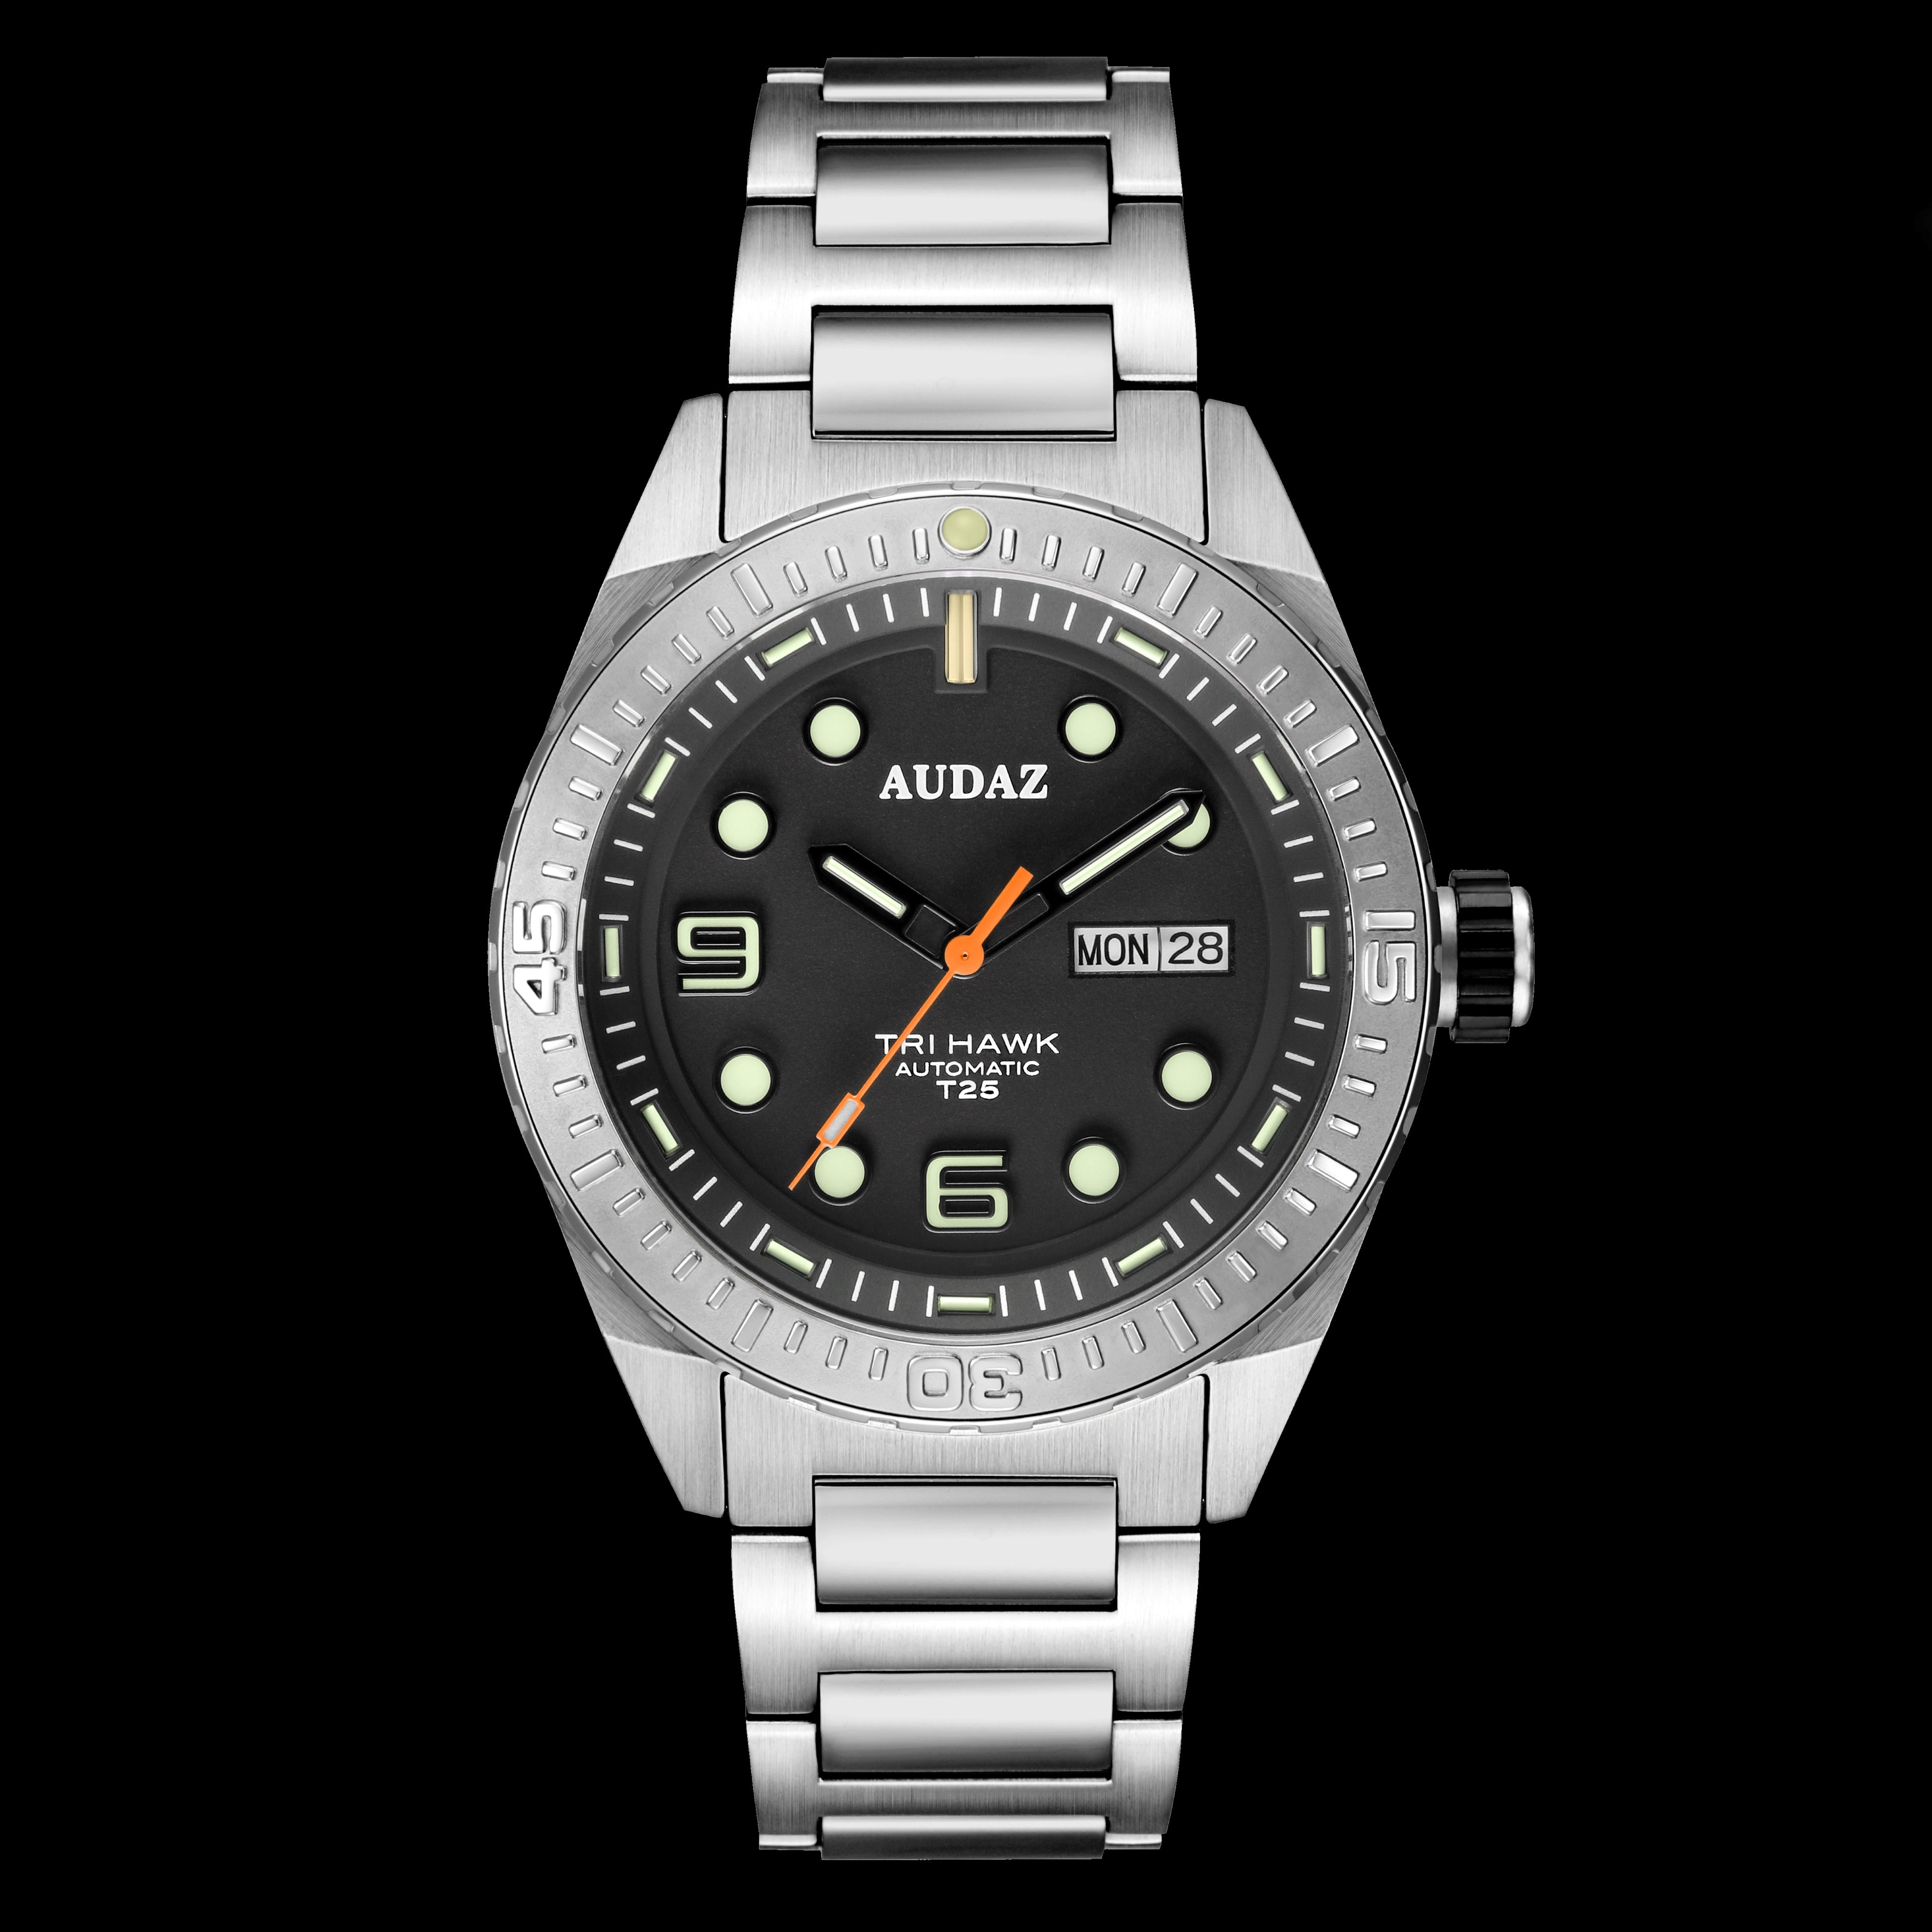 Tri-Hawk Dive Watches I with I - Tritium Lume Automatic Dials Tubes Watches Audaz